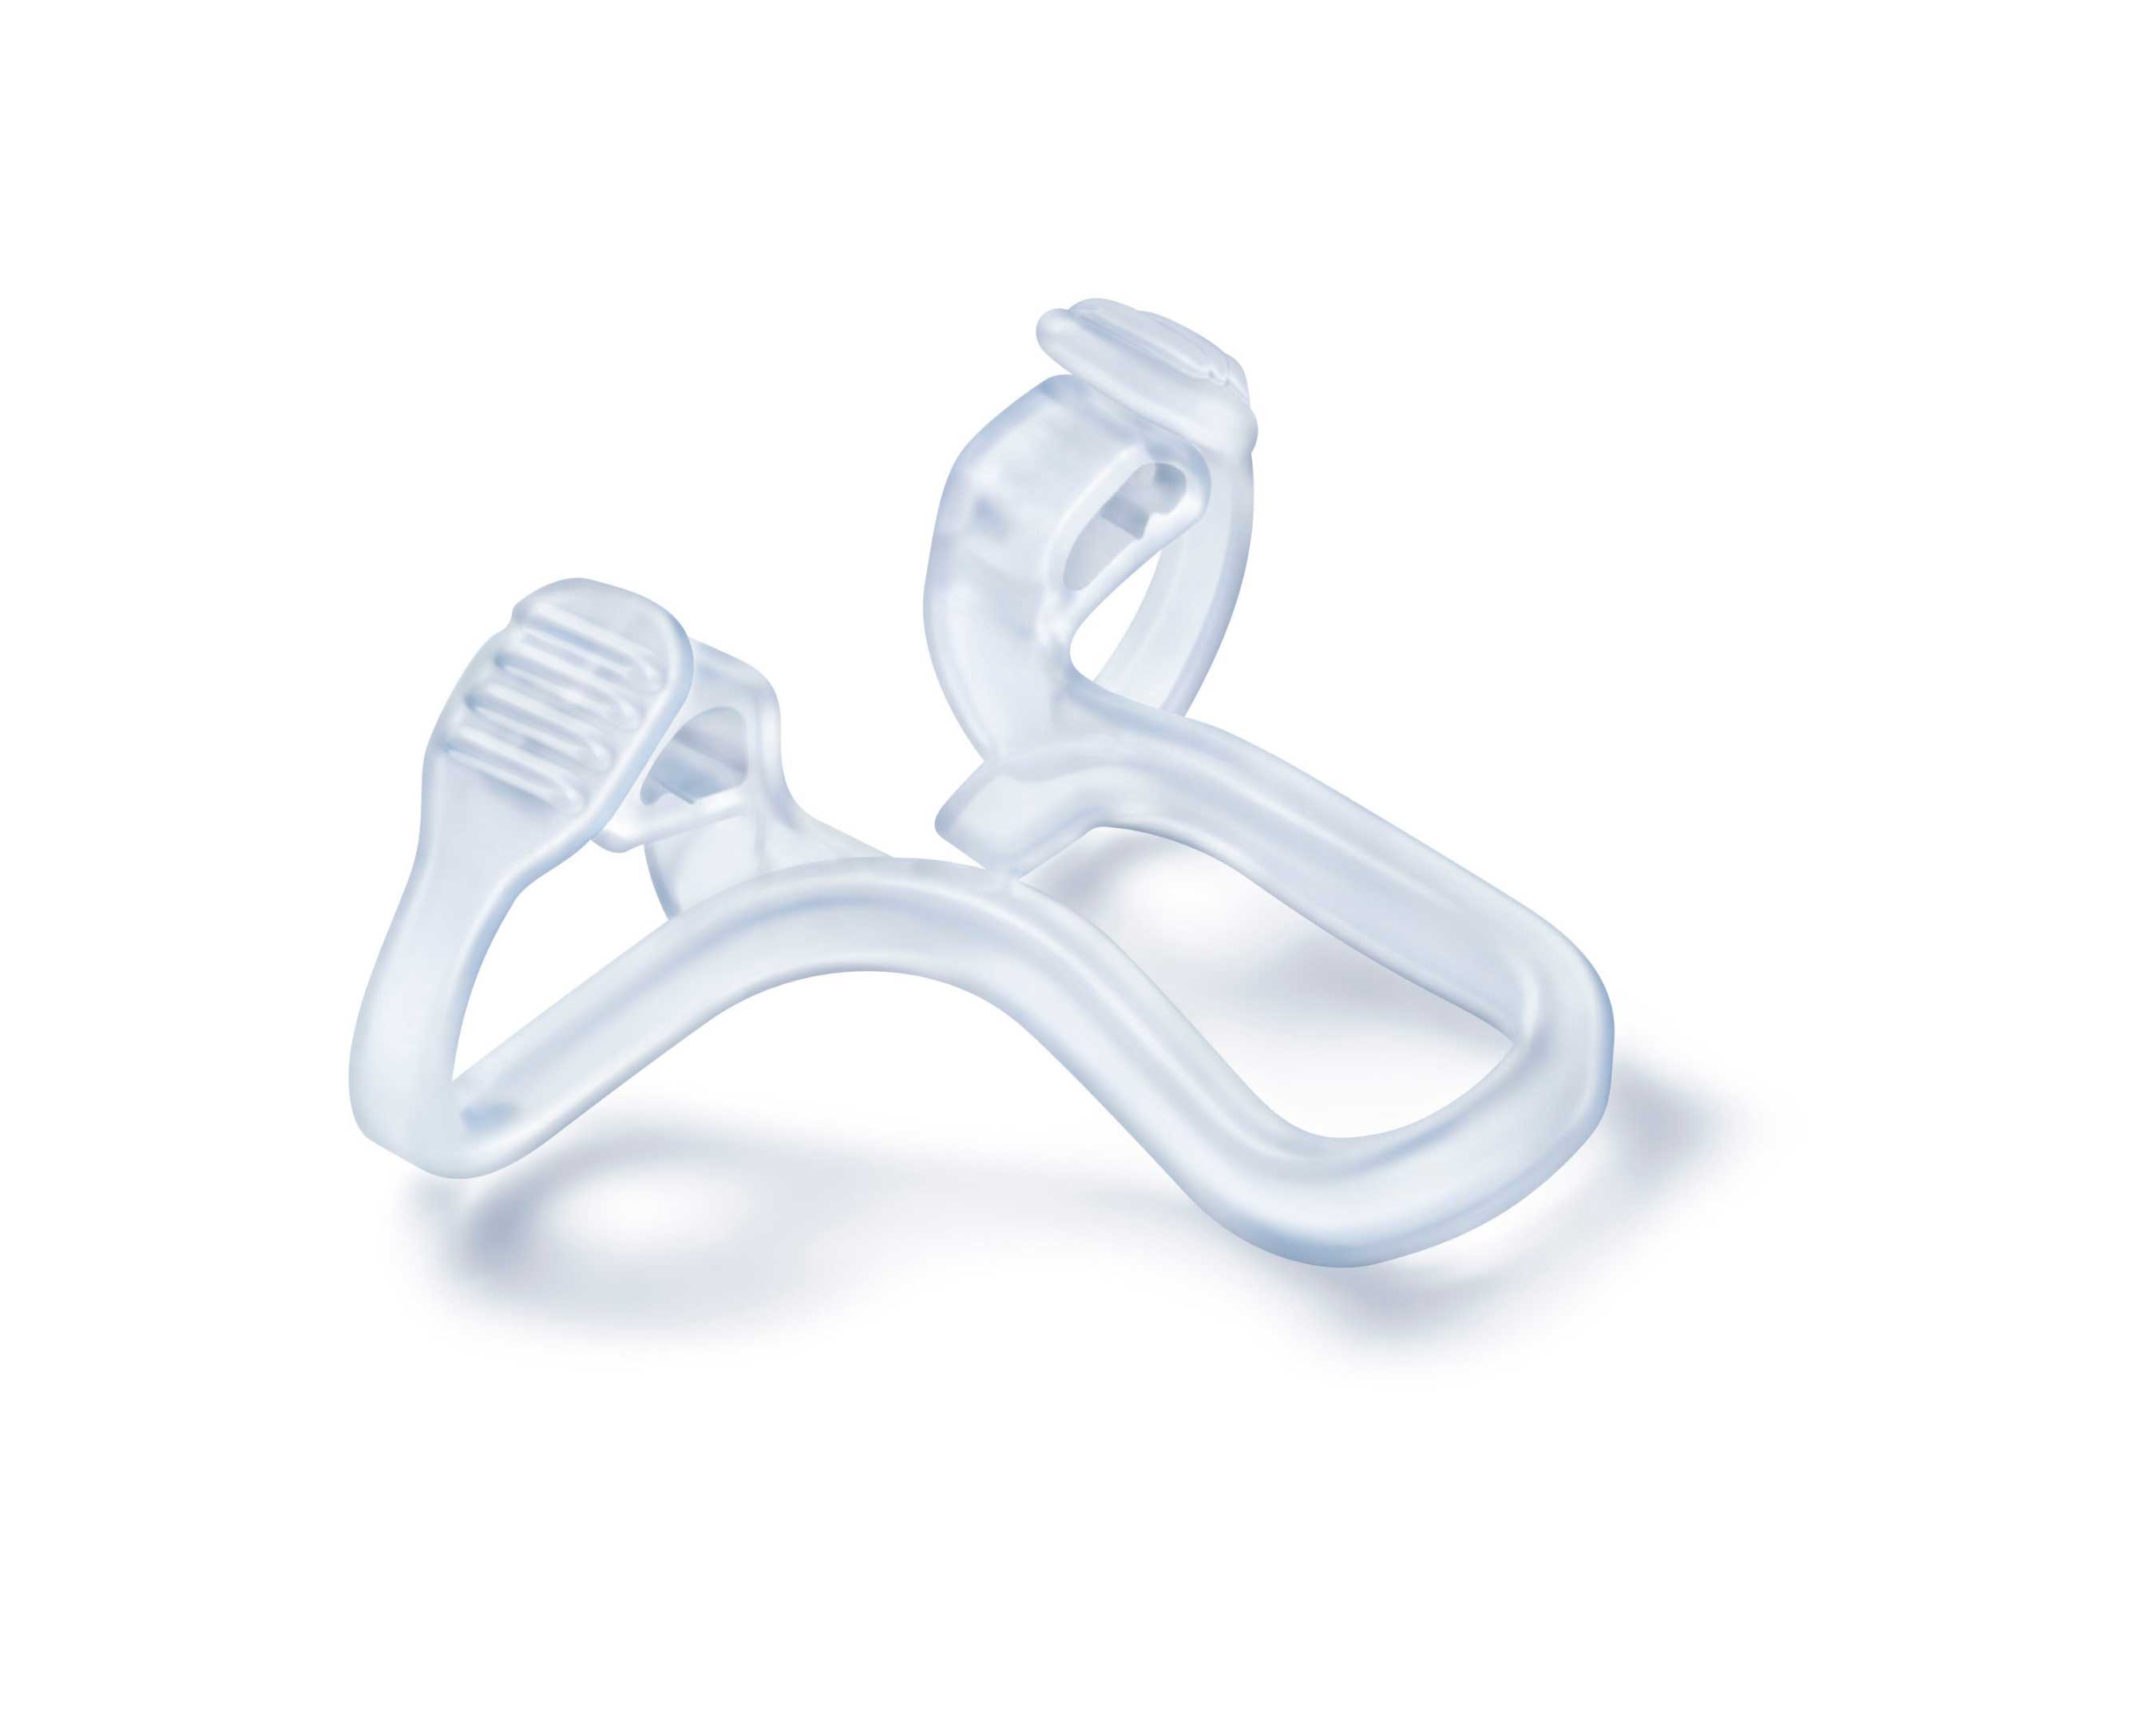 Mute is made from soft medical grade polymers so it rests comfortably inside the nose.